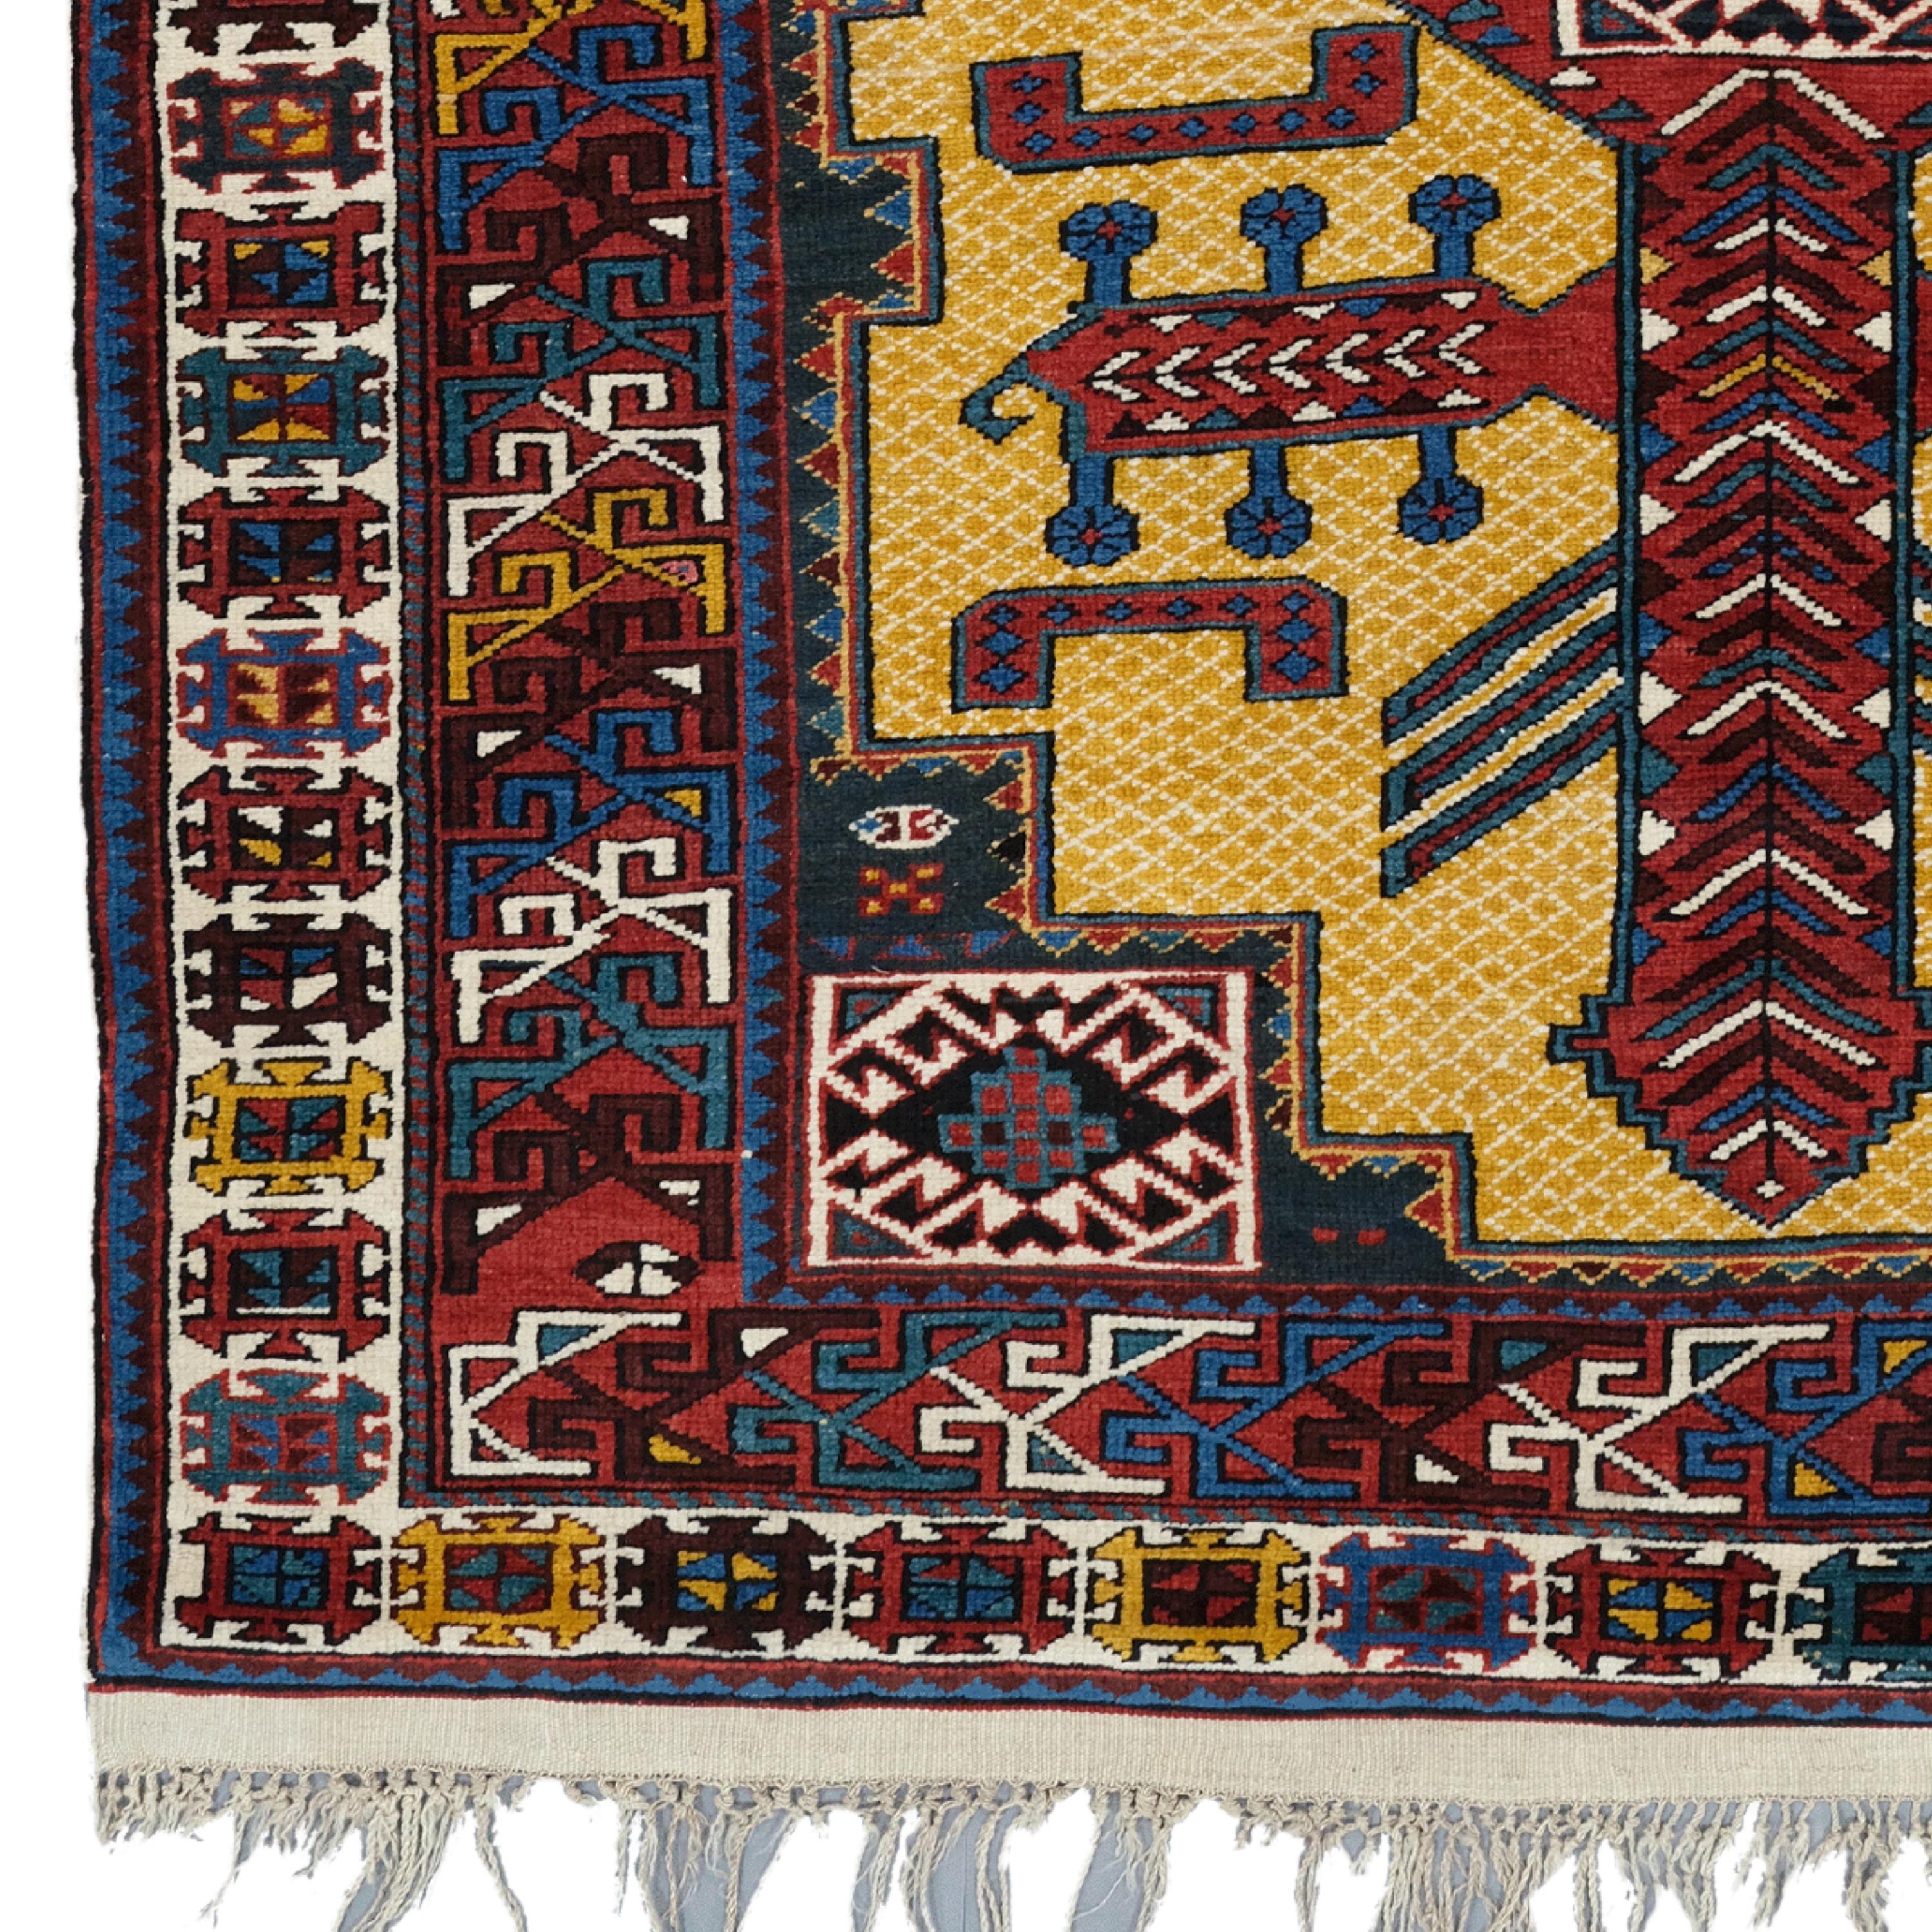 Antique Shirvan Rug  Caucasus Rug
19th Century Caucasian Shirvan Rug
Size: 130x228 cm

An Authentic Work of Art: 19th Century Caucasian Shirvan Carpet

If you want to add an authentic and stylish touch to your home or office, this 19th Century